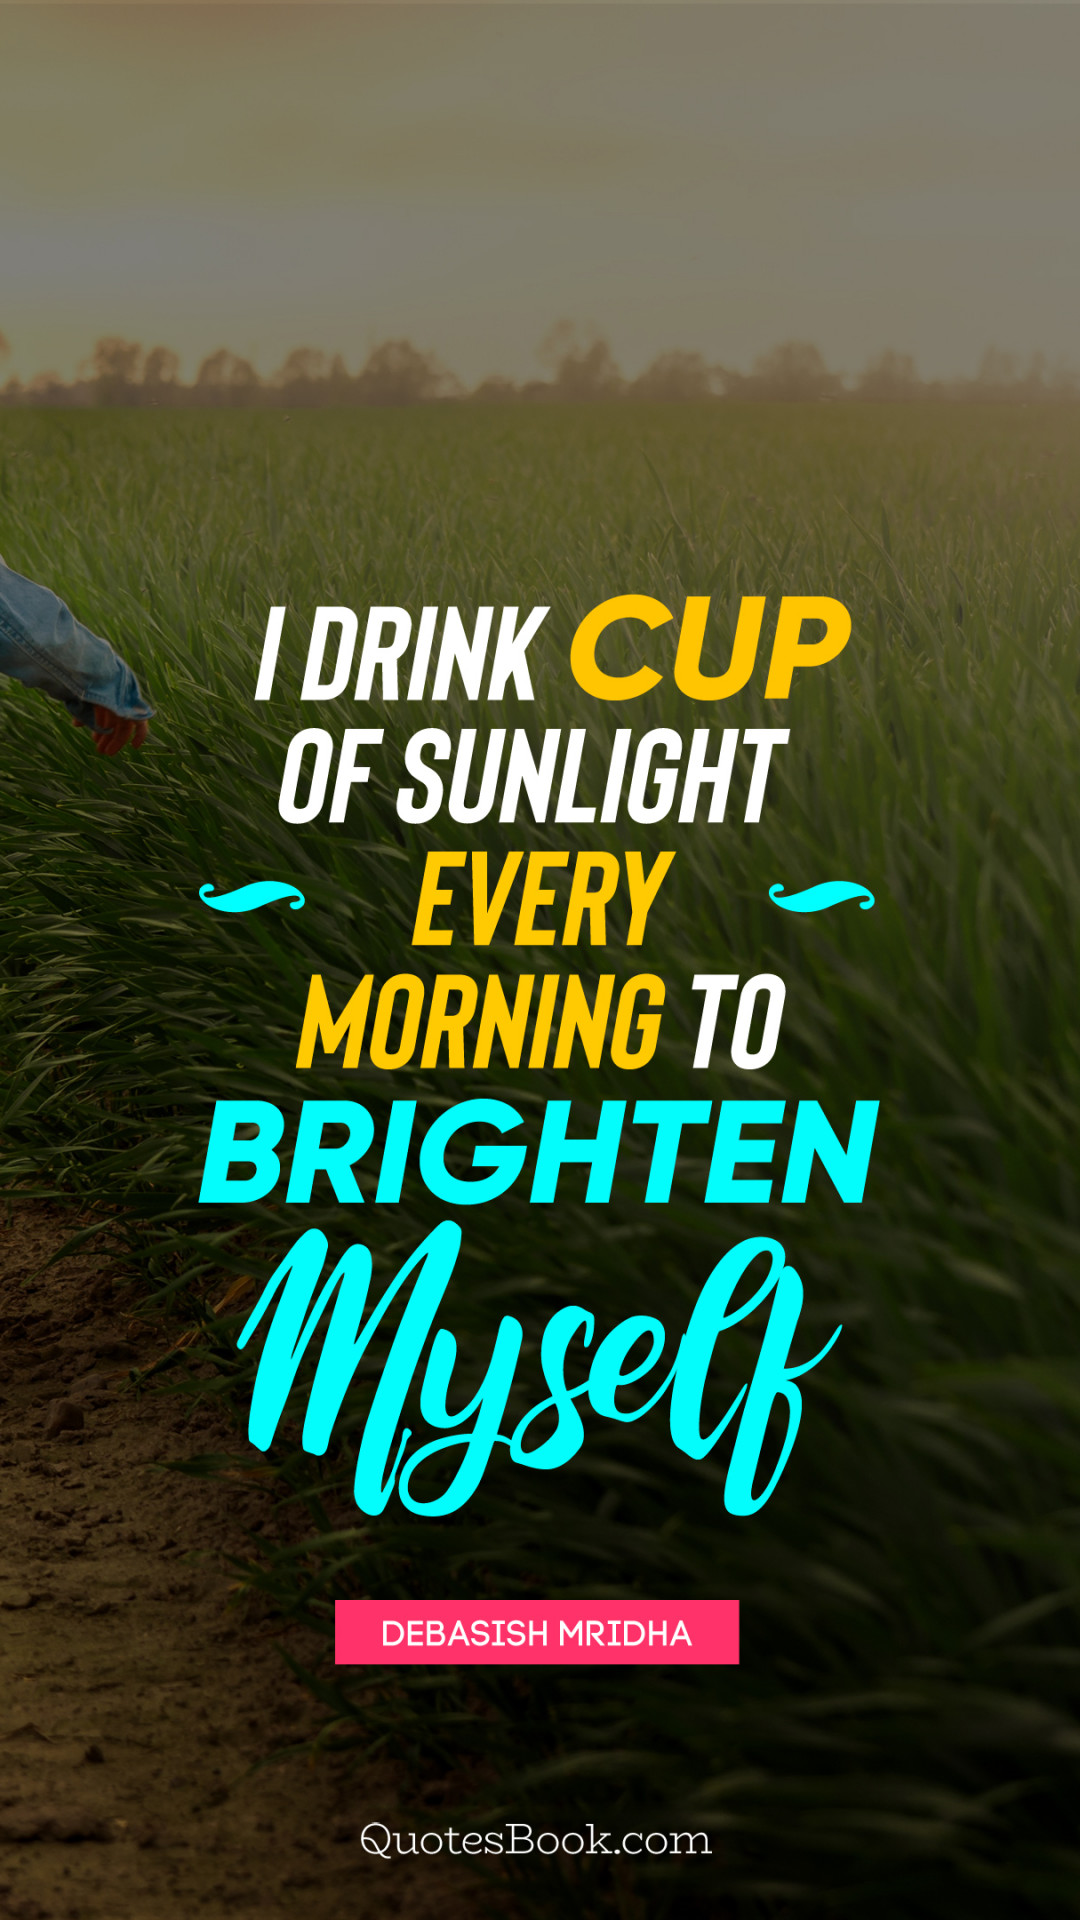 I drink cup of sunlight every morning to brighten myself. - Quote by